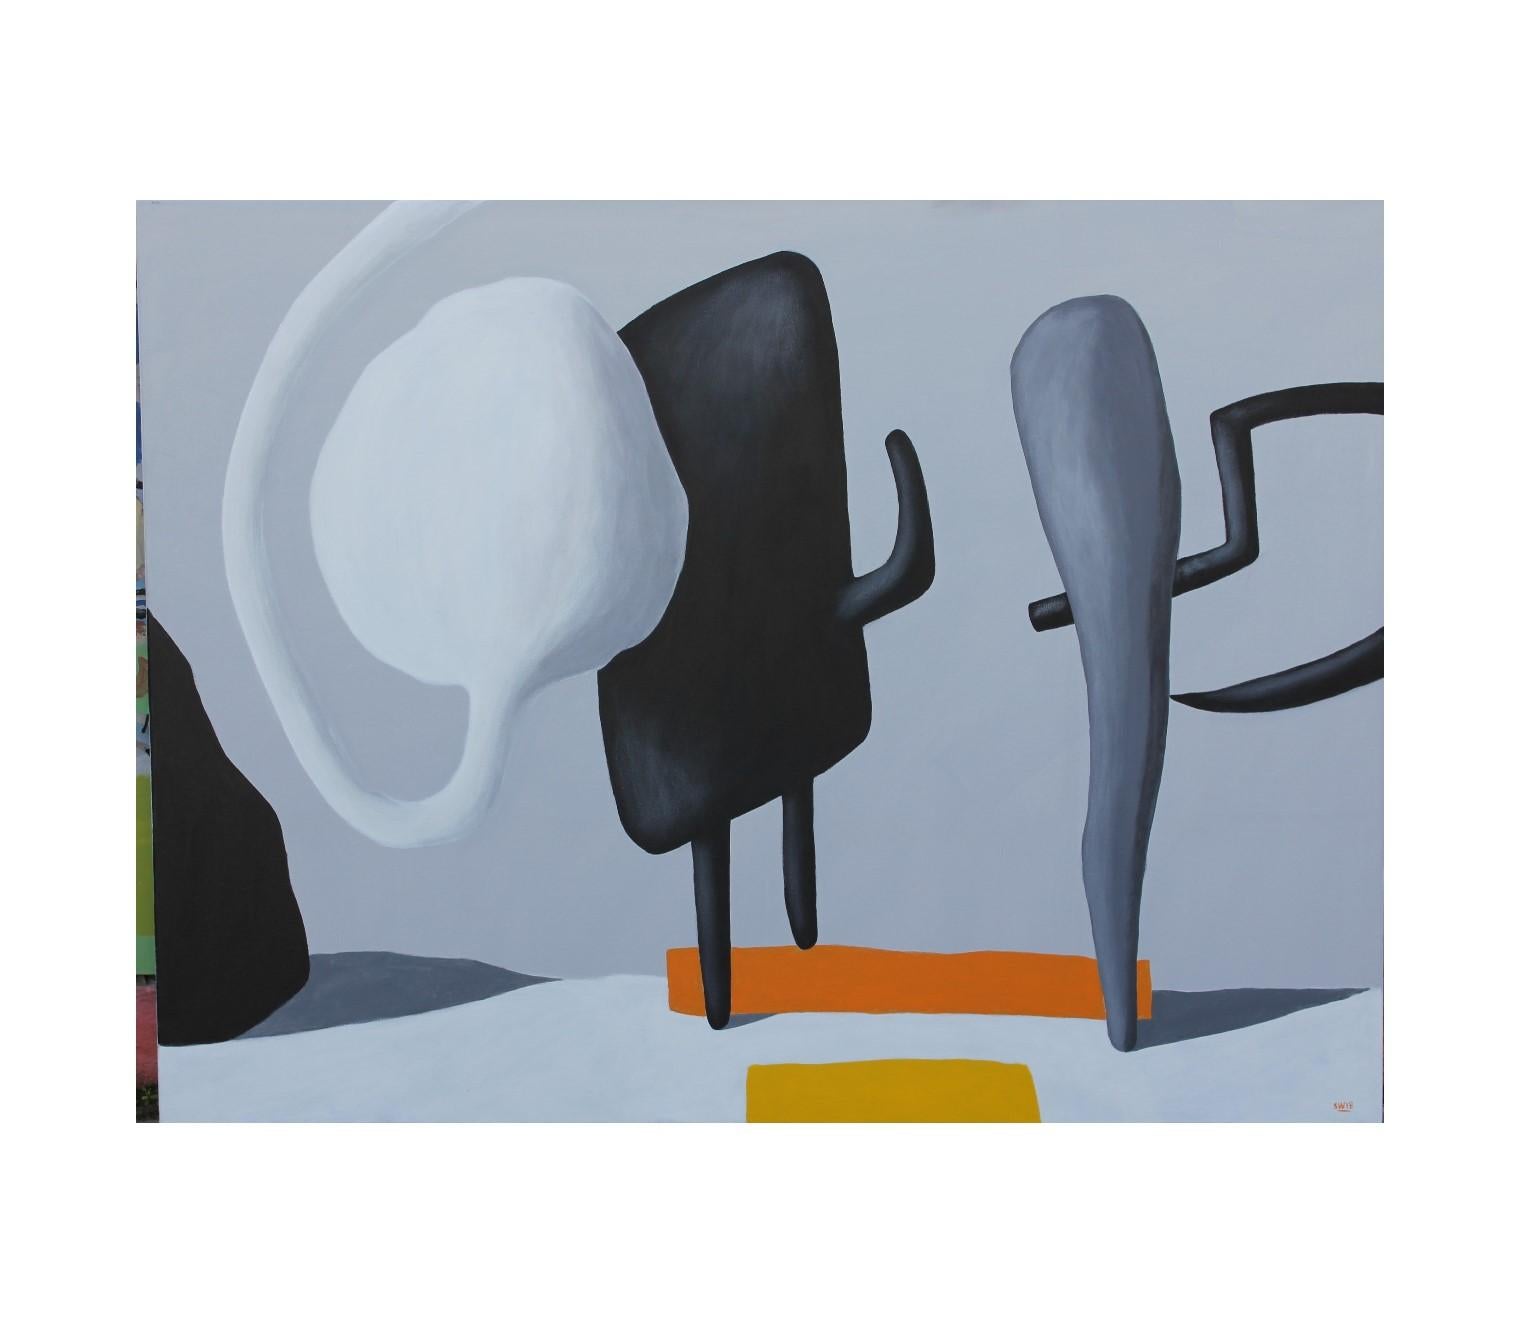 "Spermy and Licorice Popsicle Meet the Club" Bubble Surrealist Painting